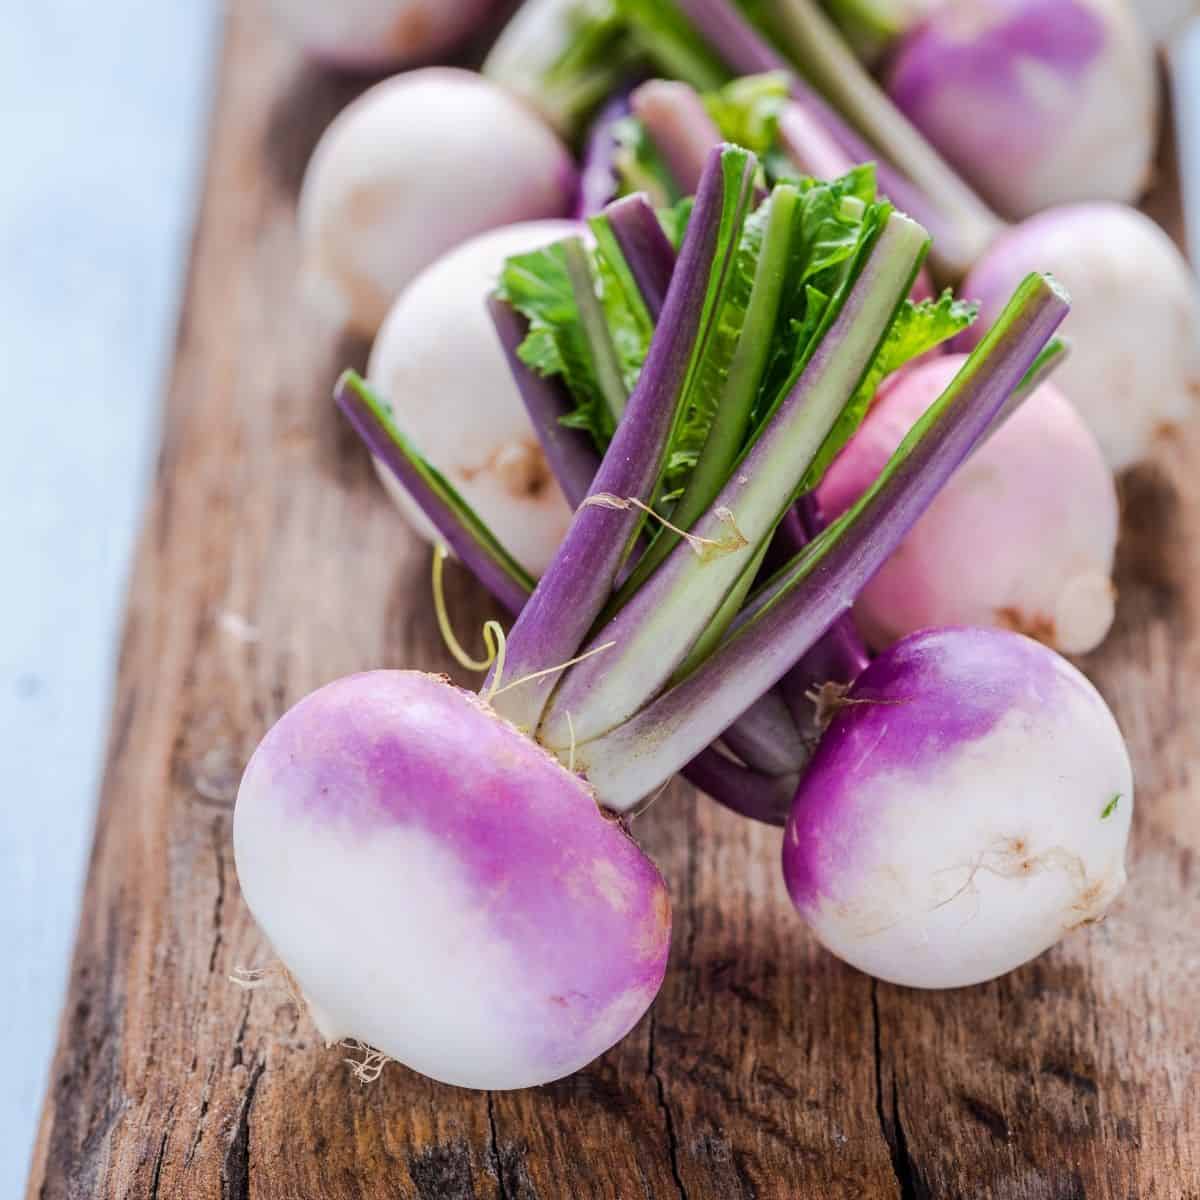 How To Freeze Turnips: Get Tips For Freezing, Using & Storing Turnips Here!